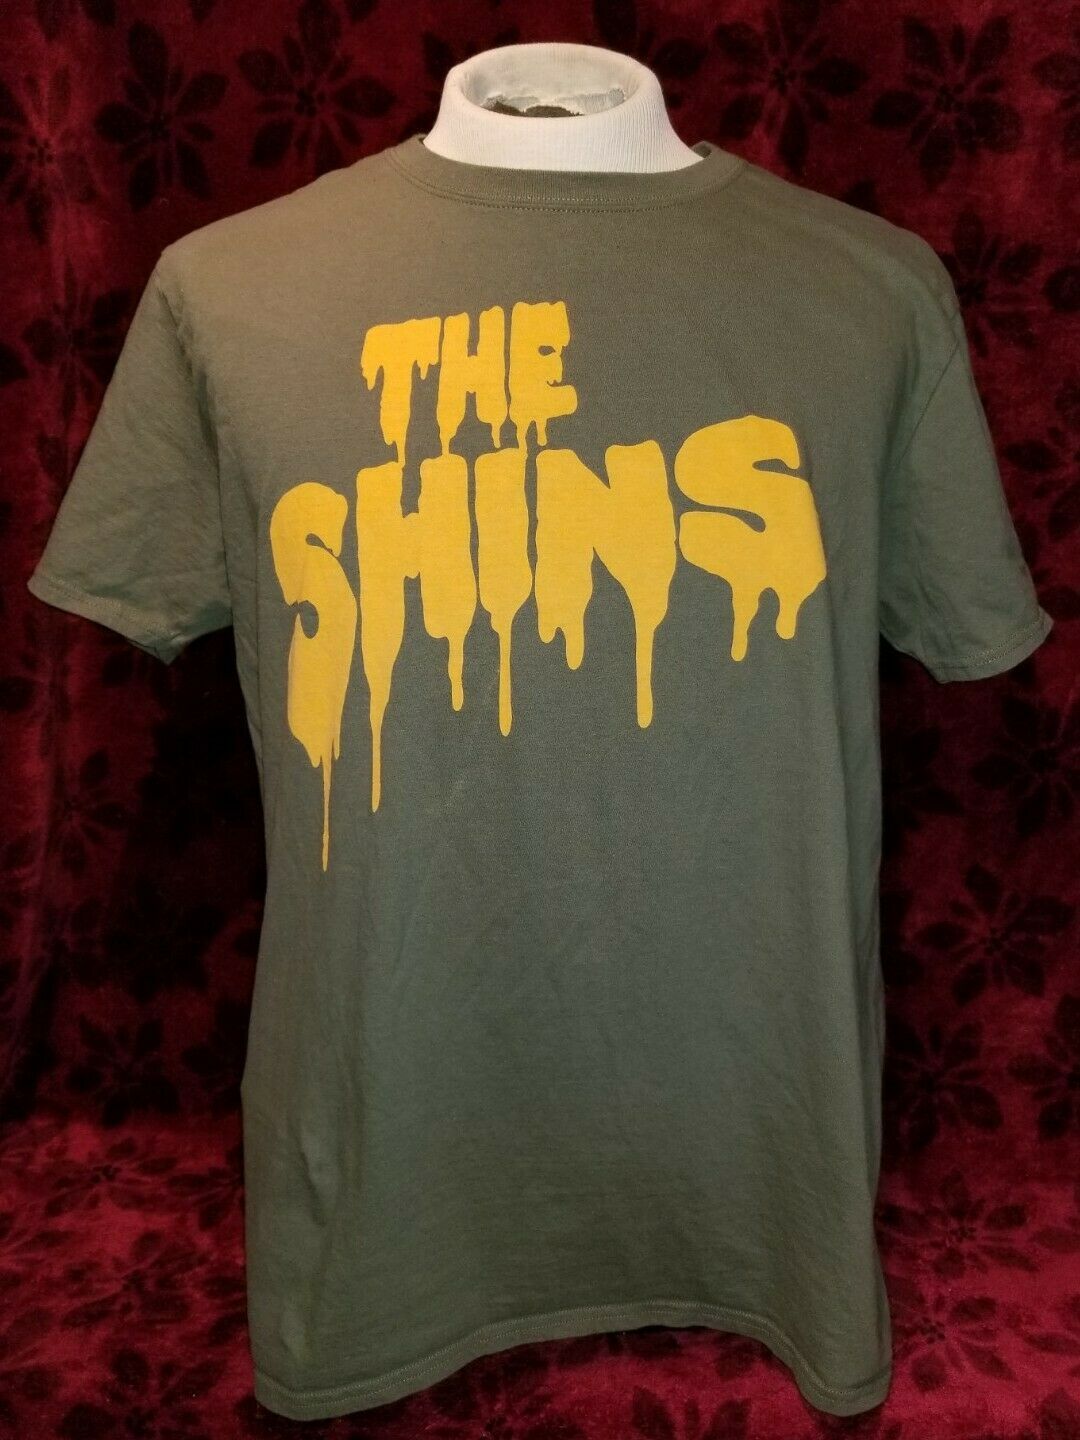 LARGE The Shins T-shirt Indie Rock  Outfit Style - LARGE The Shins T-shirt Indie Rock  Outfit Style -   16 style Indie rock ideas